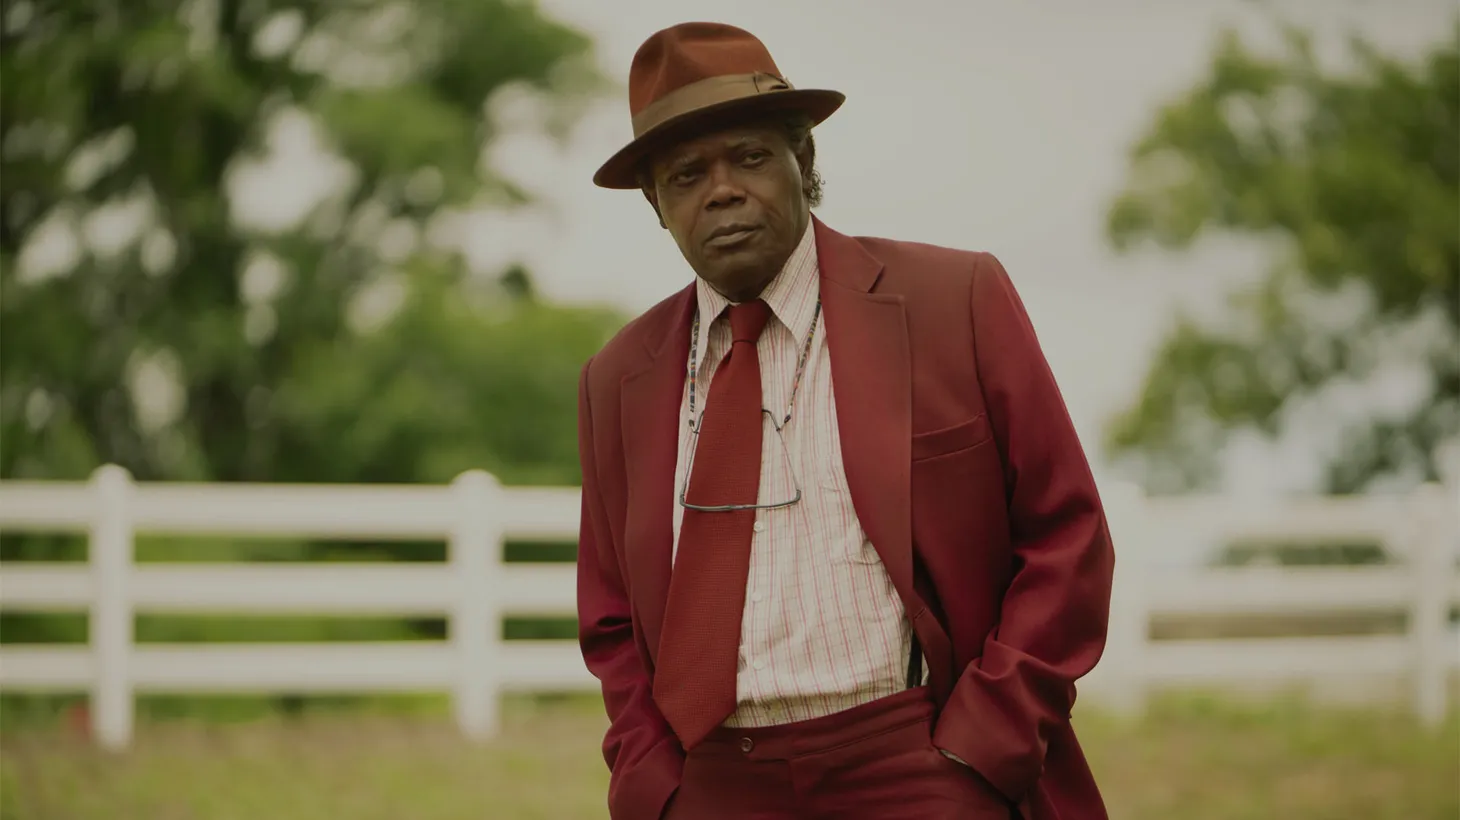 Samuel L. Jackson stars as an elderly man afflicted by dementia who sets out to solve a murder in the miniseries “The Last Days of Ptolemy Grey.”